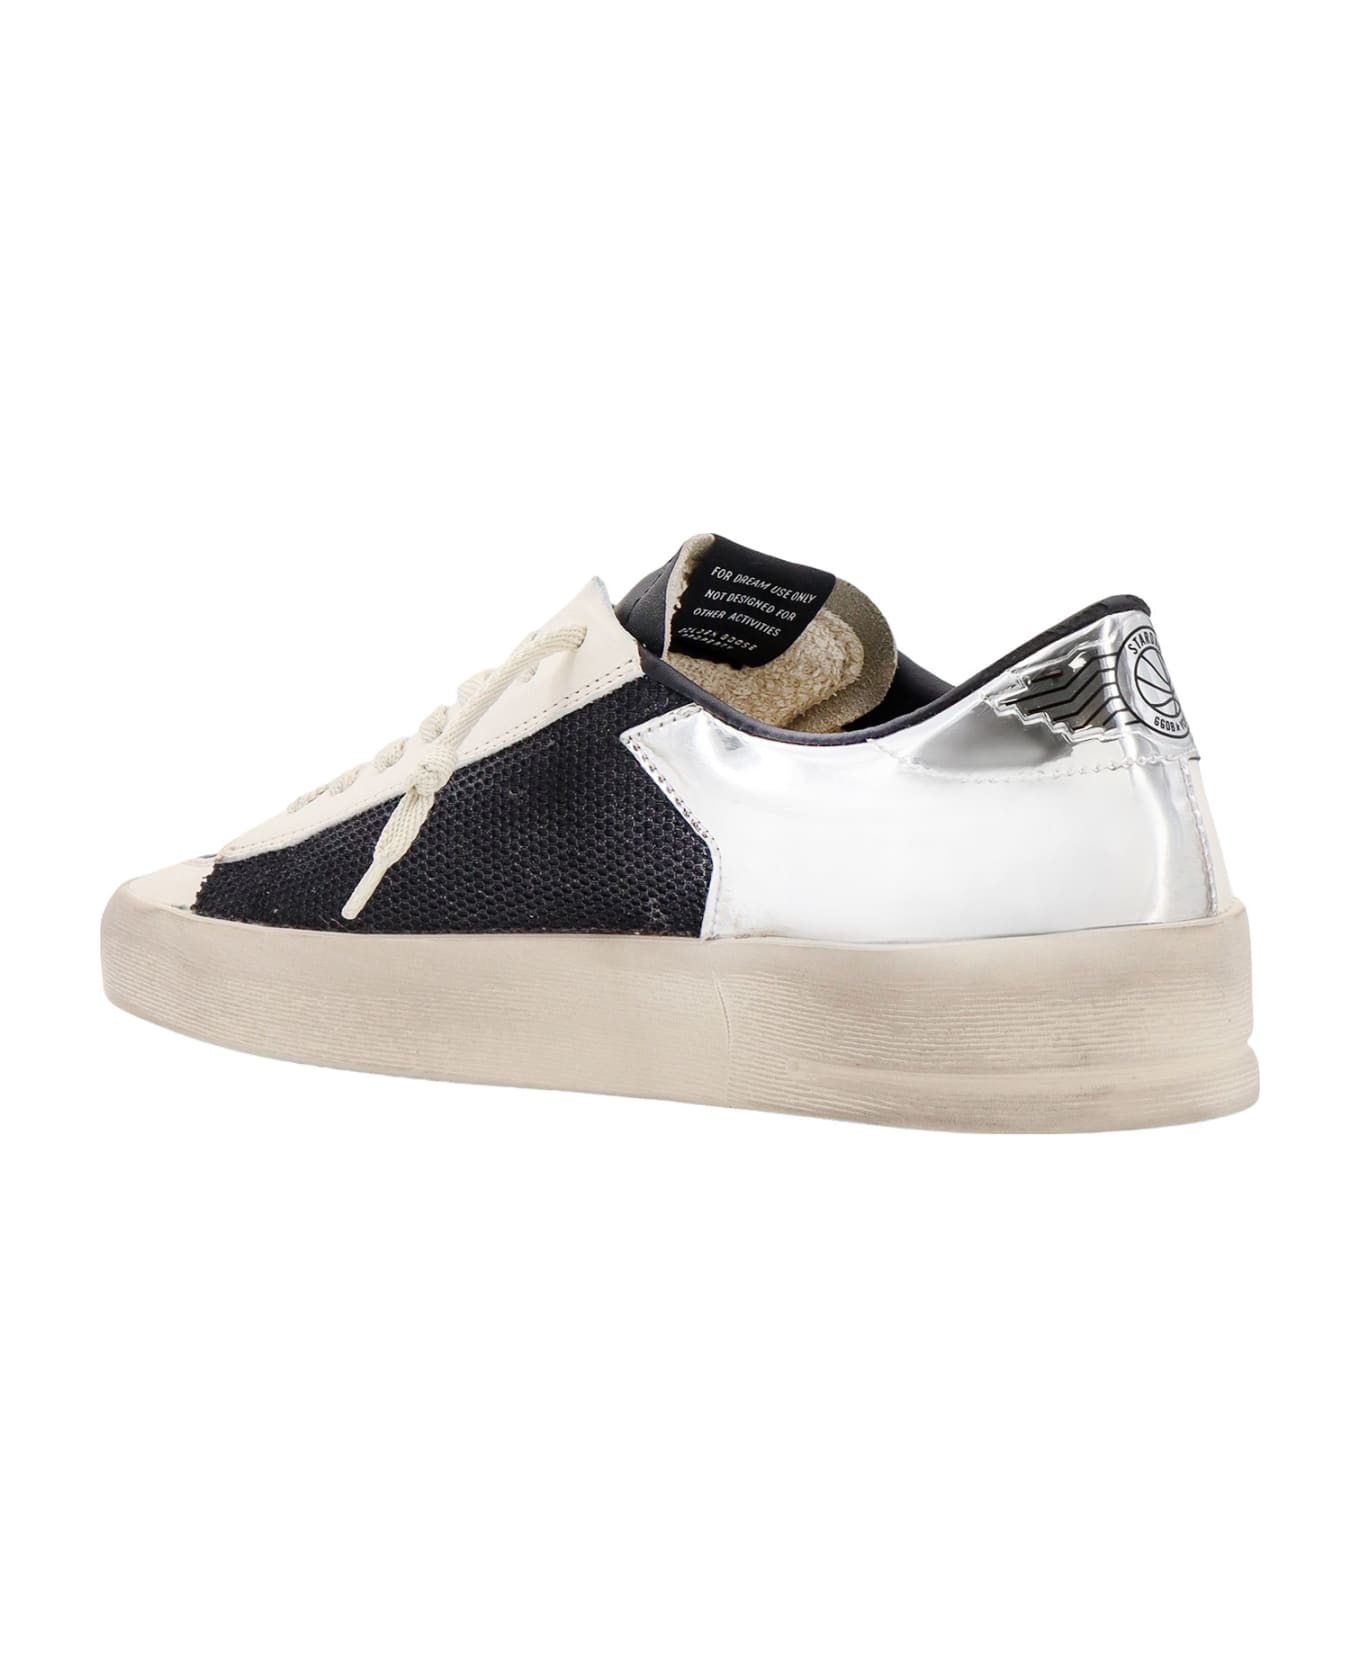 Golden Goose Leather And Mesh Stardan Sneakers - Black